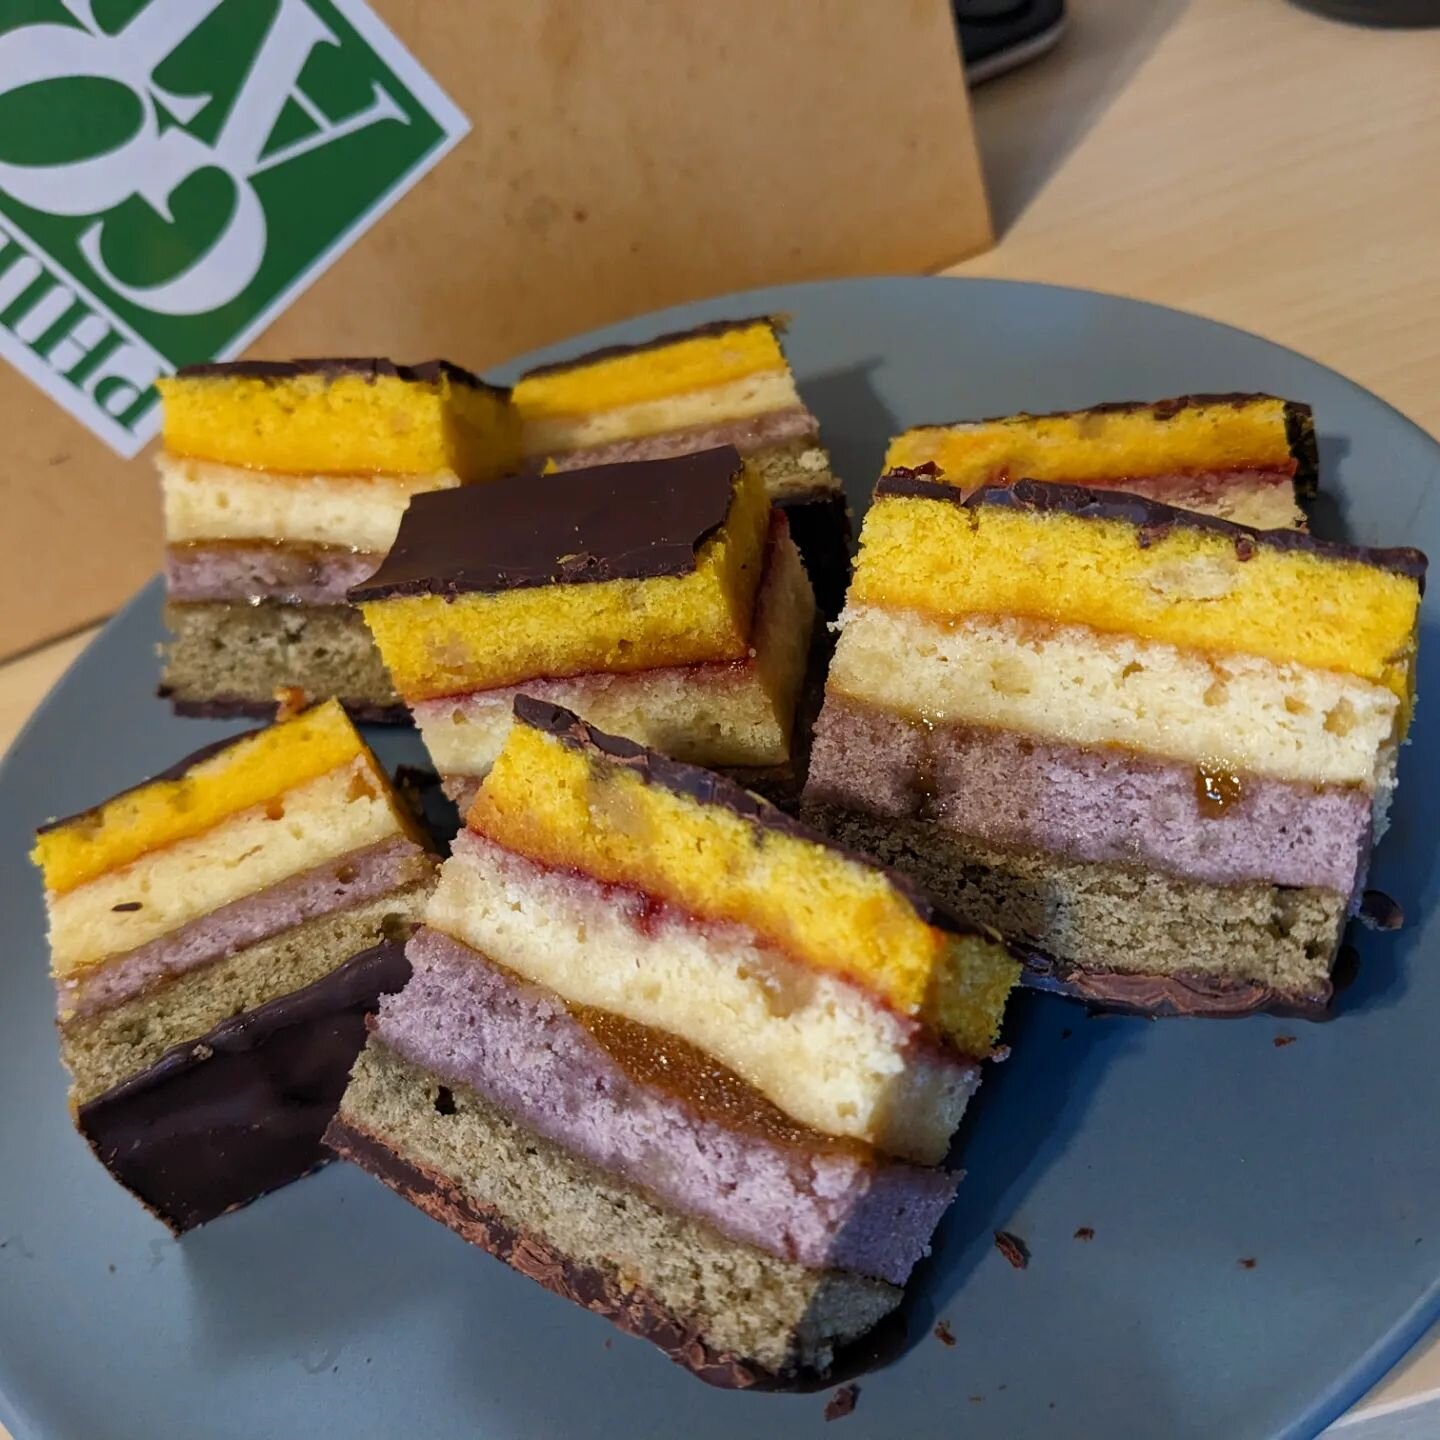 I'm not a baker, but I brute forced my way to making Nonbinary flag Italian Rainbow Cookies! 💛🤍💜🖤
Used to love getting these cookies as a kid; 😆 doing the nb colors

The @smittenkitchen recipe 👍👍👍